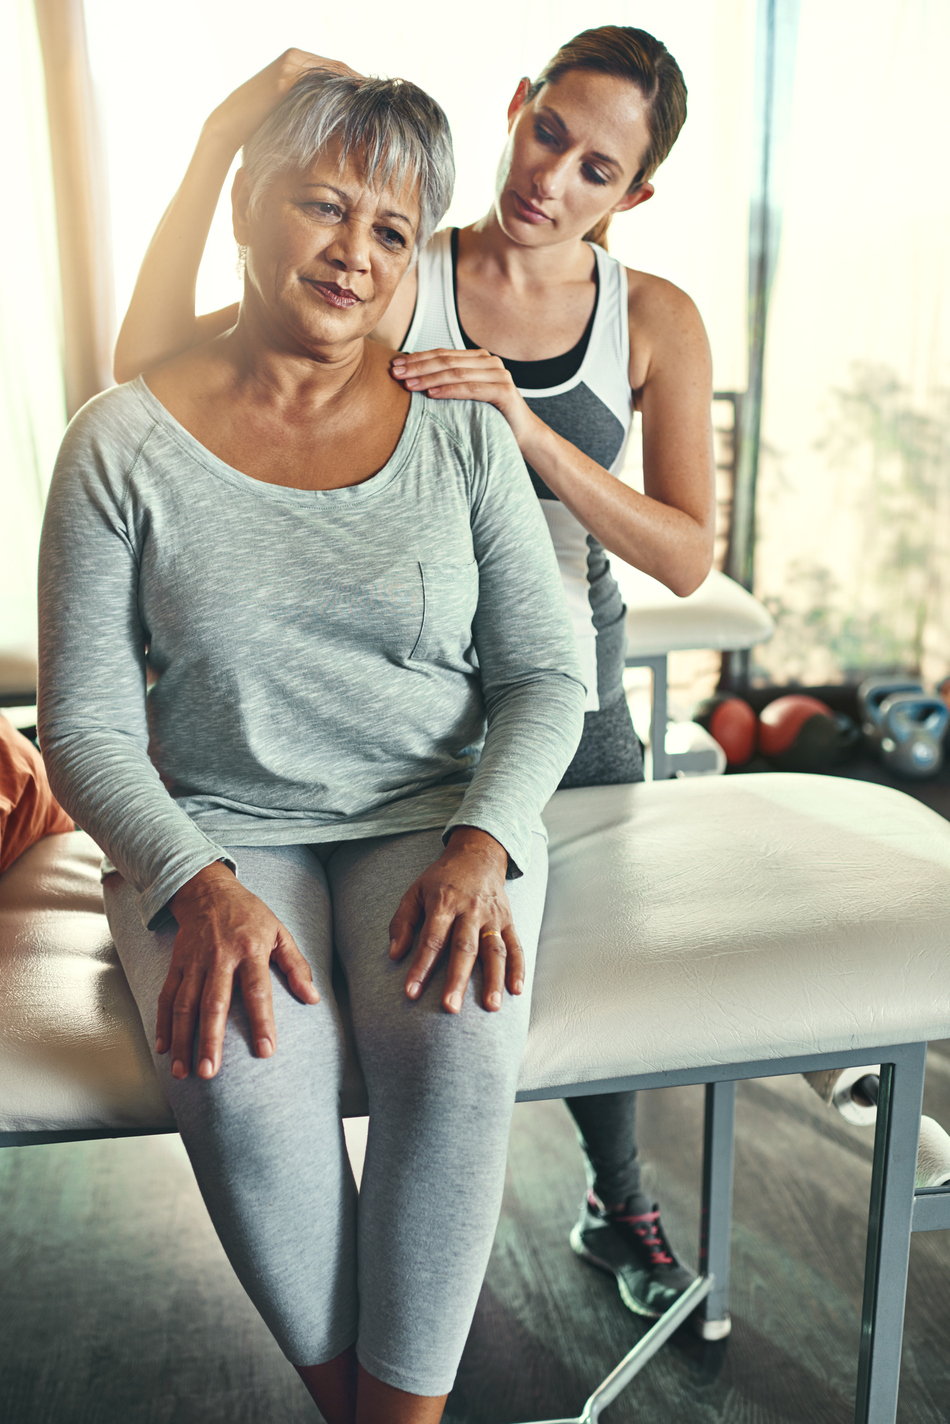 How Physical Therapists Treat Pain